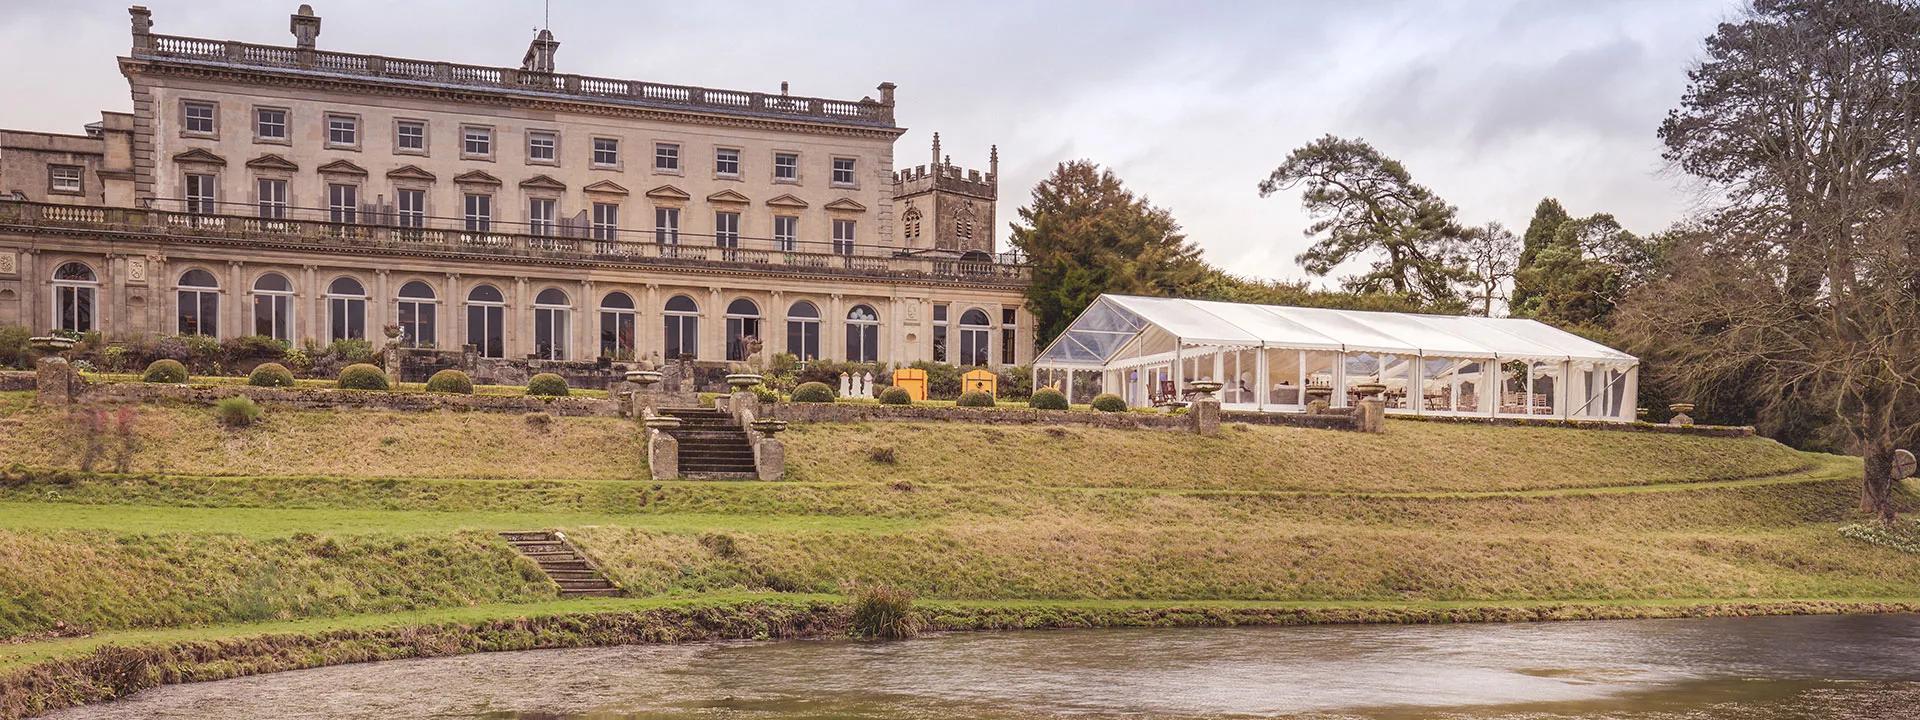 Cowley Manor   Curious Hotels   PL19 header